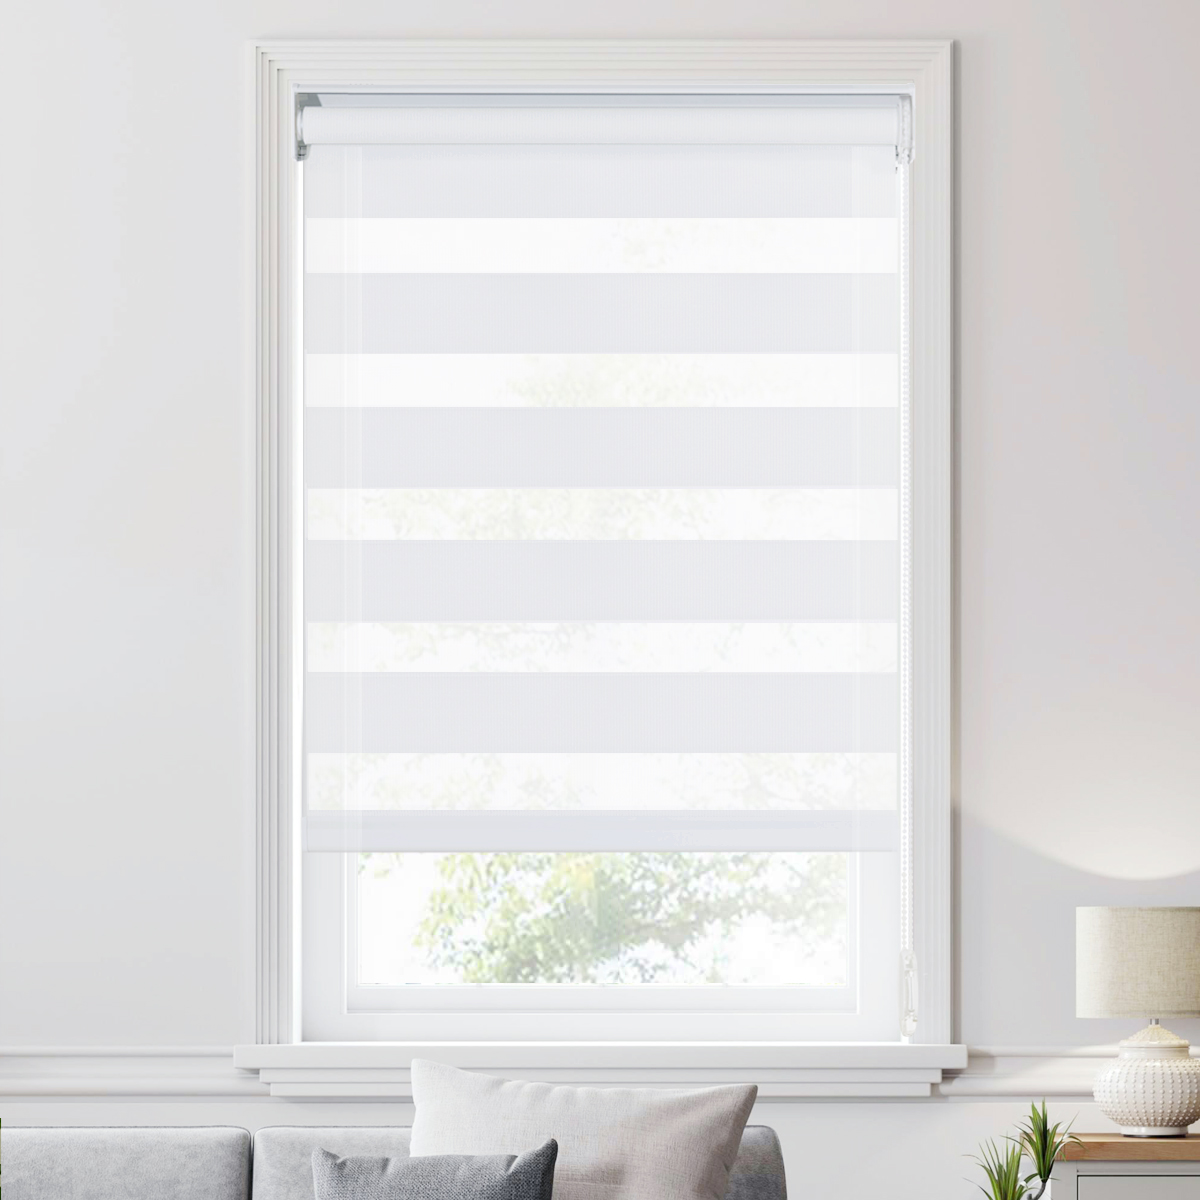 Copy Zebra Roller Blinds, Dual Layer Shades, Sheer Or Privacy Light Control, Day And Night Window Drapes